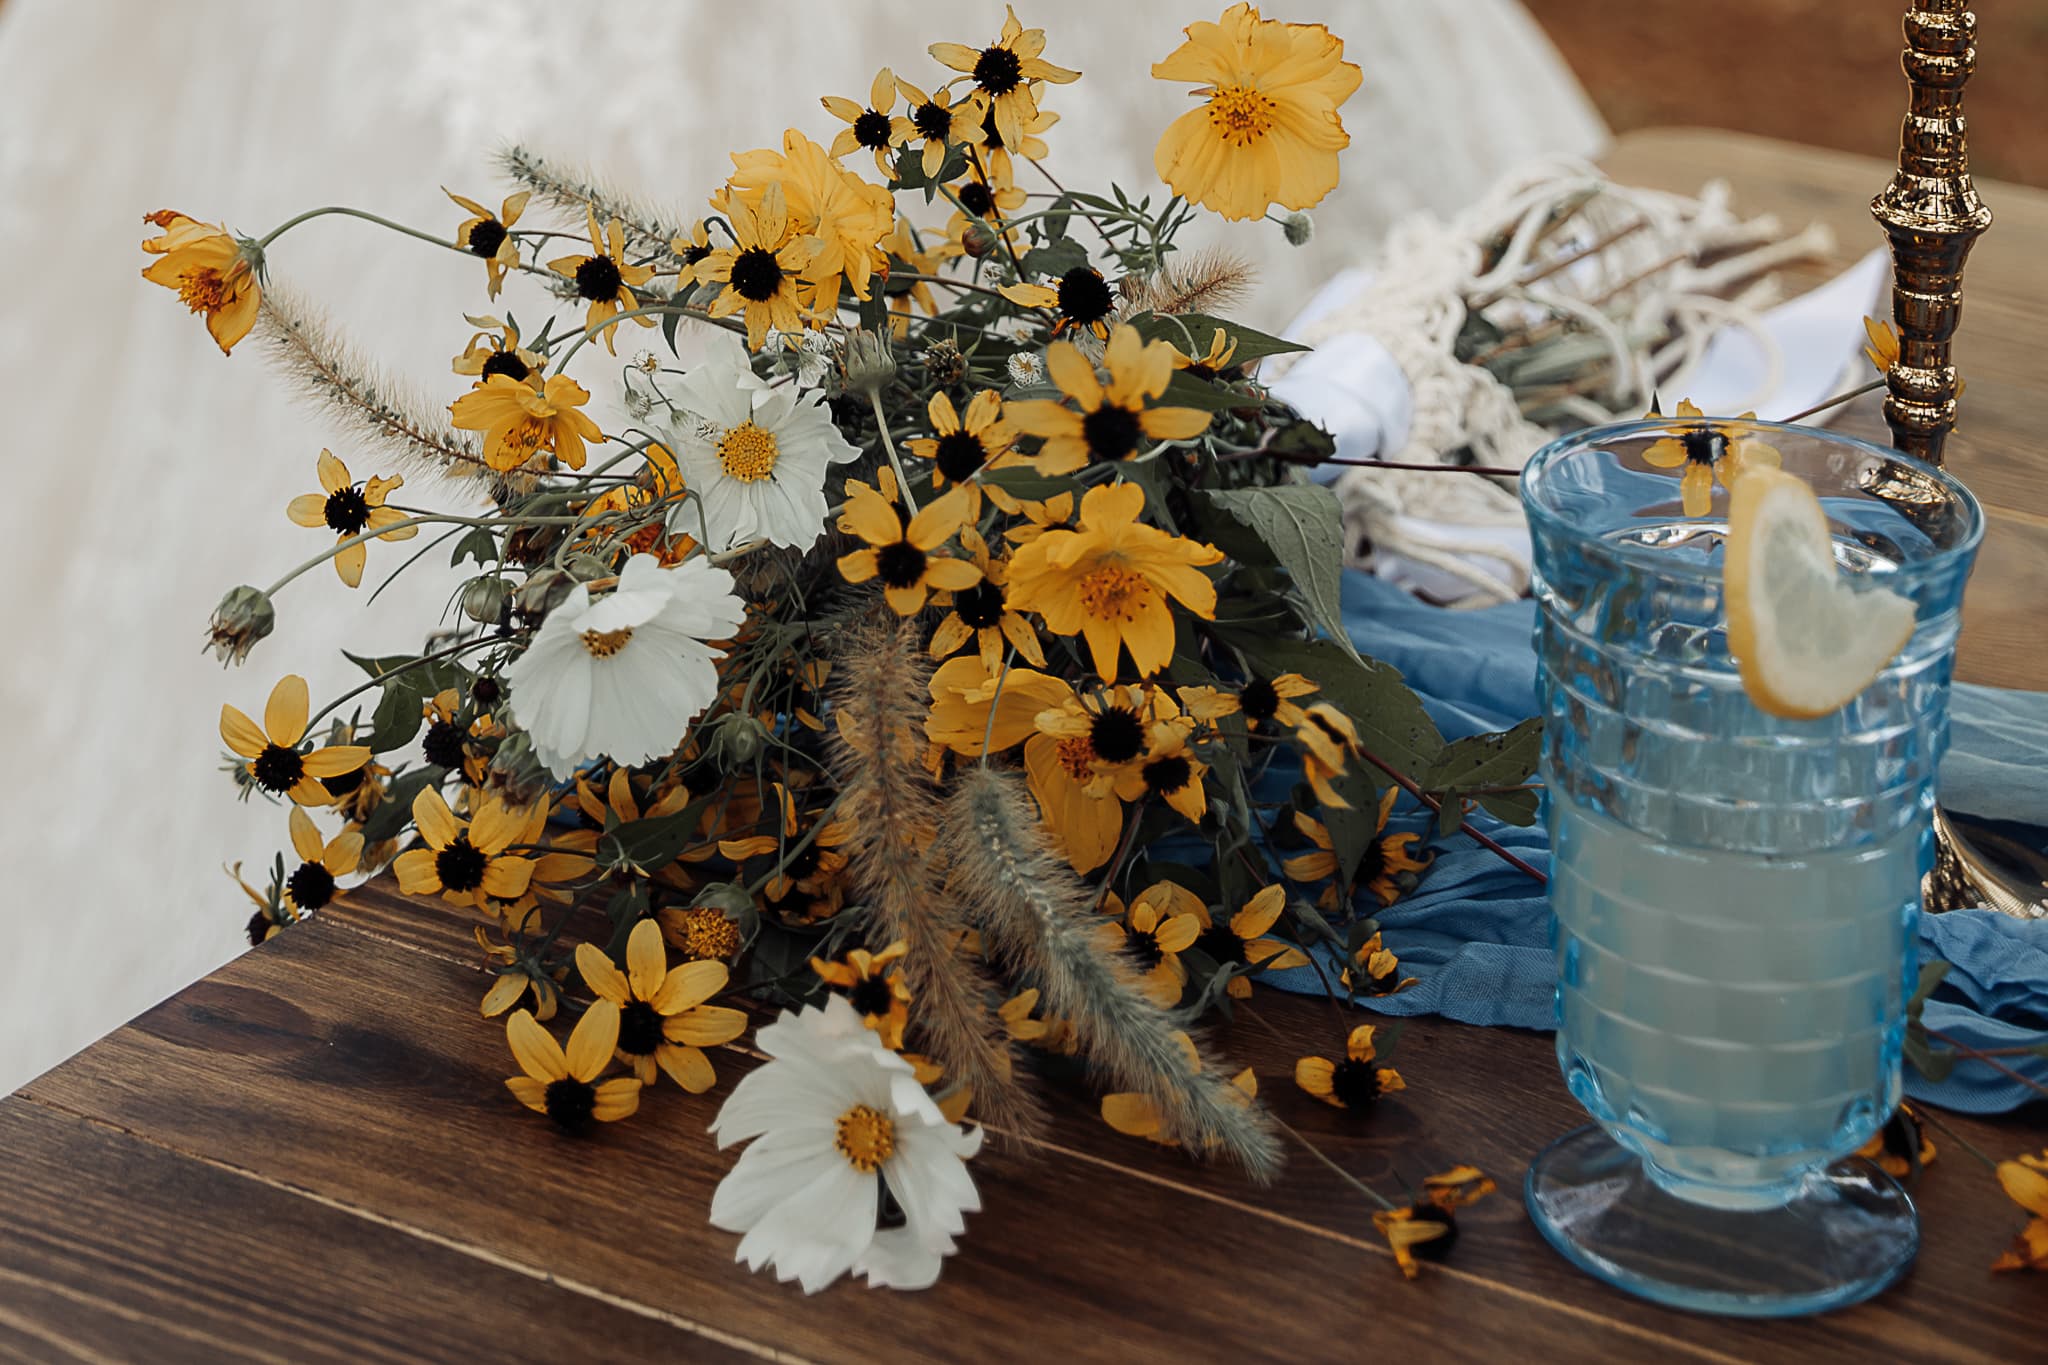 A bouquet of black-eyed susans sits on a table next to a glass of lemmonade.